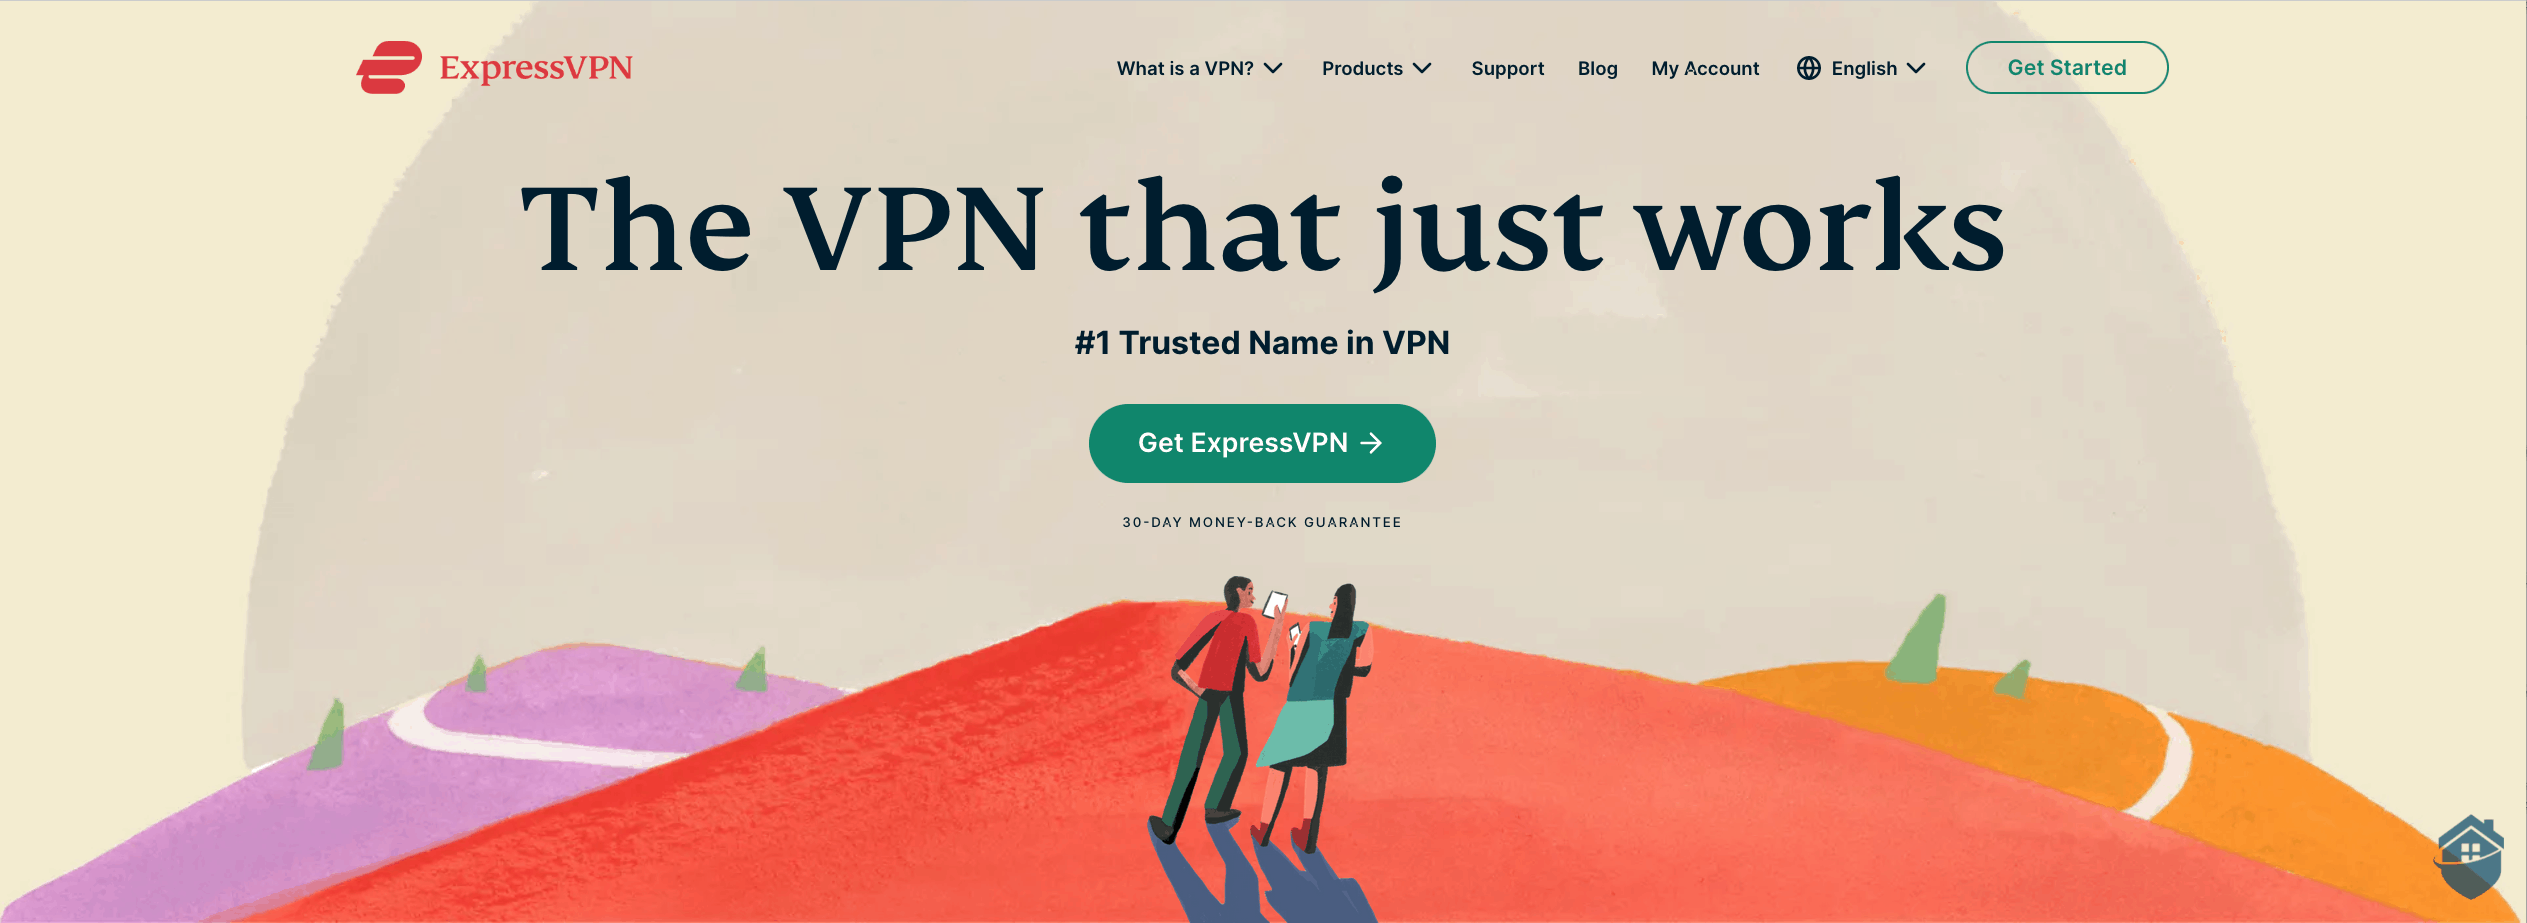 ExpressVPN more than “just works,” it’s one of the most secure VPNs on the market